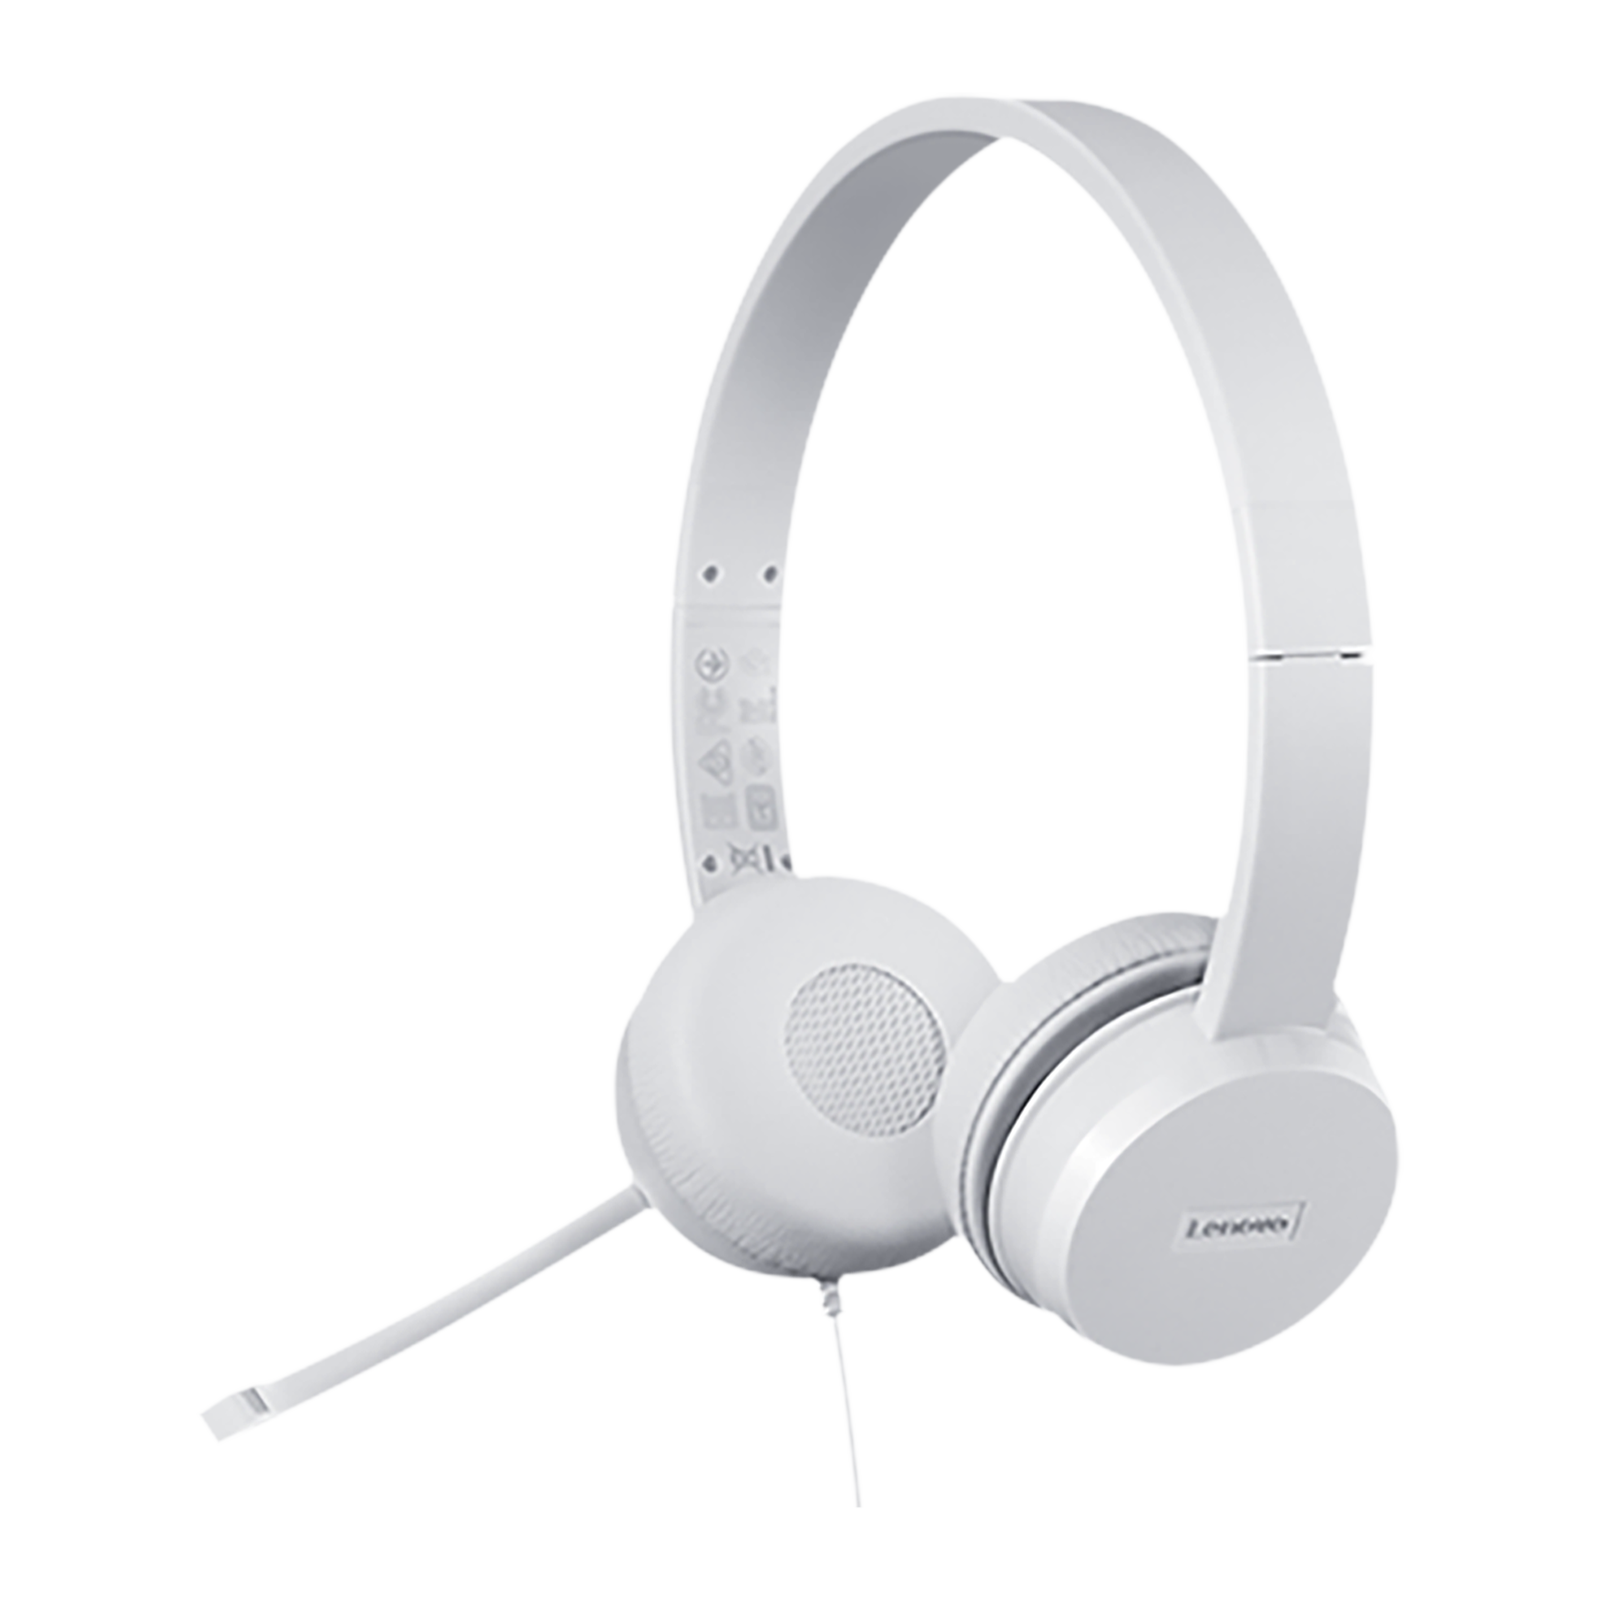 Lenovo 110 Stereo GXD1B67867 Wired Headphone with Mic (On Ear, White)